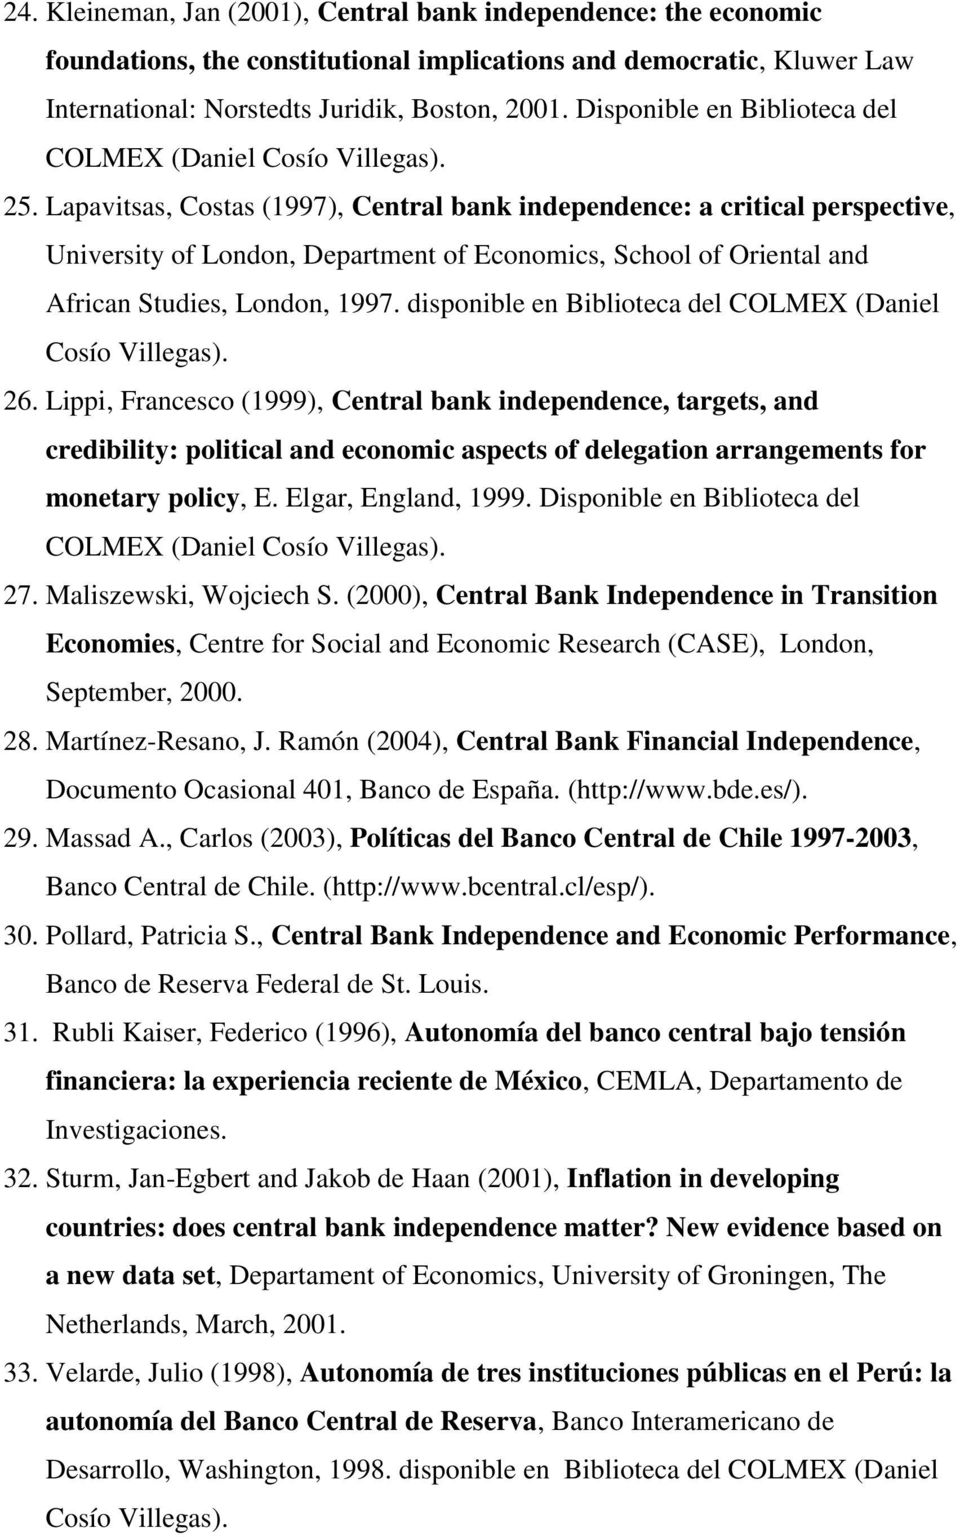 Lapavitsas, Costas (1997), Central bank independence: a critical perspective, University of London, Department of Economics, School of Oriental and African Studies, London, 1997.